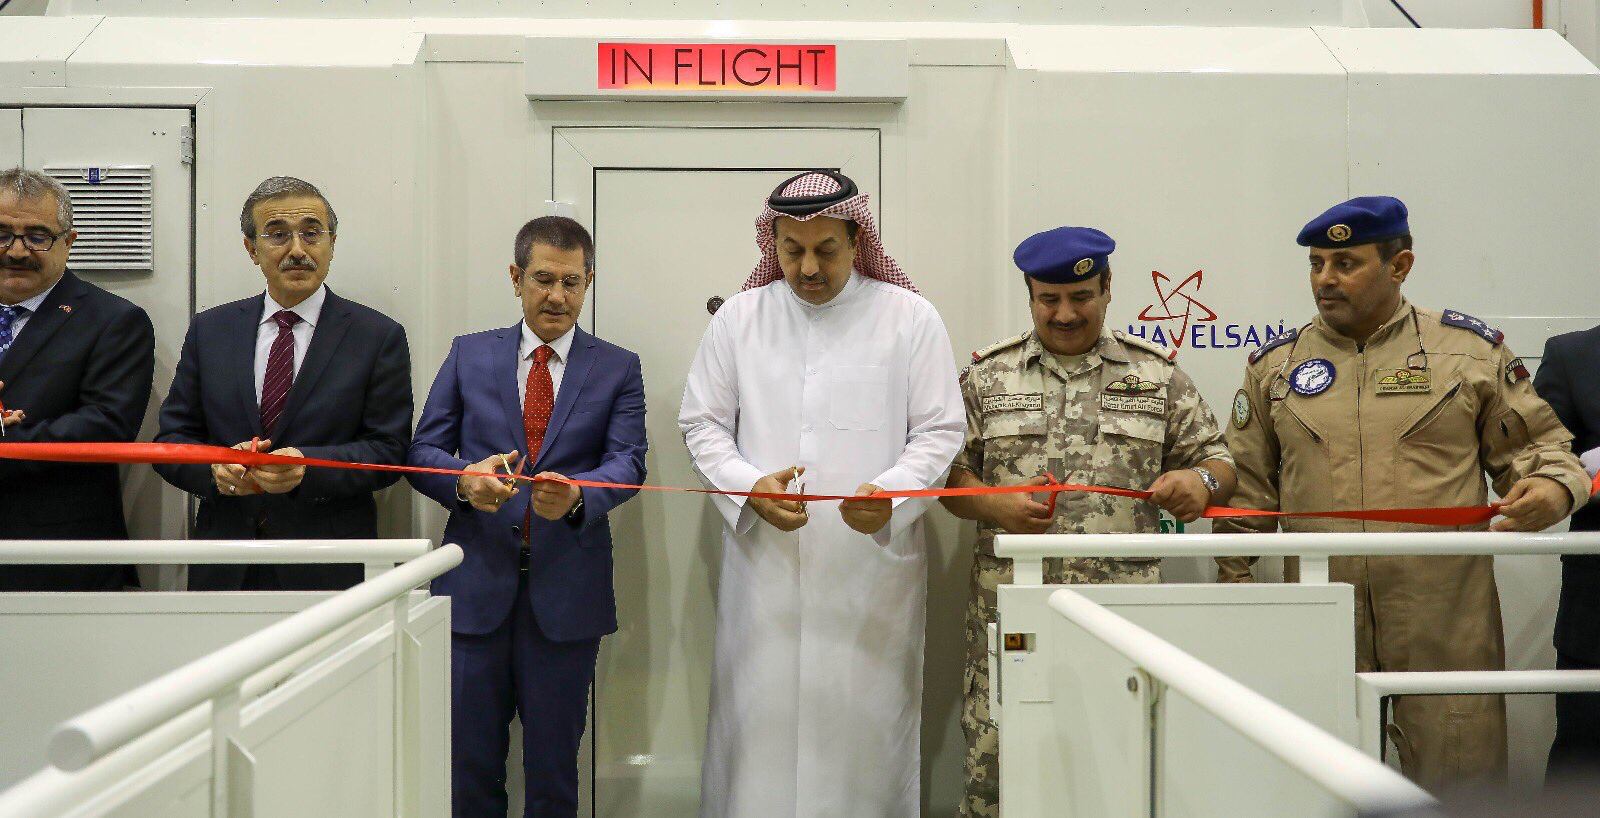 The Qatari Defense Minister with Turkish Defense Minister inaugurate the sophisticated AgustaWestland AW139 helicopters simulating center